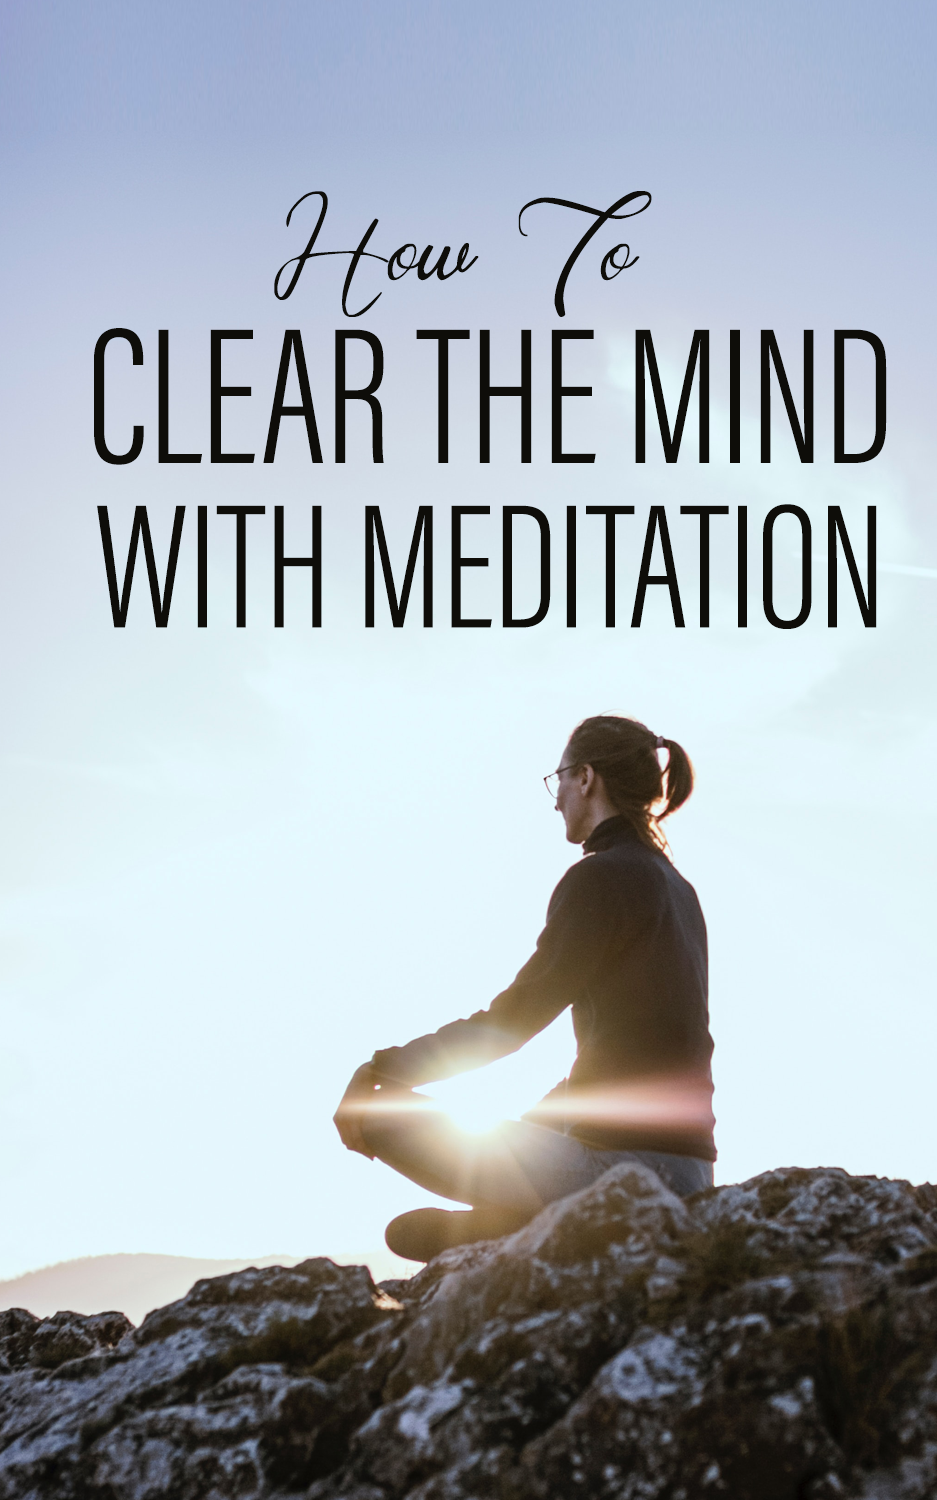 License - How To Clear the Mind with Mediation